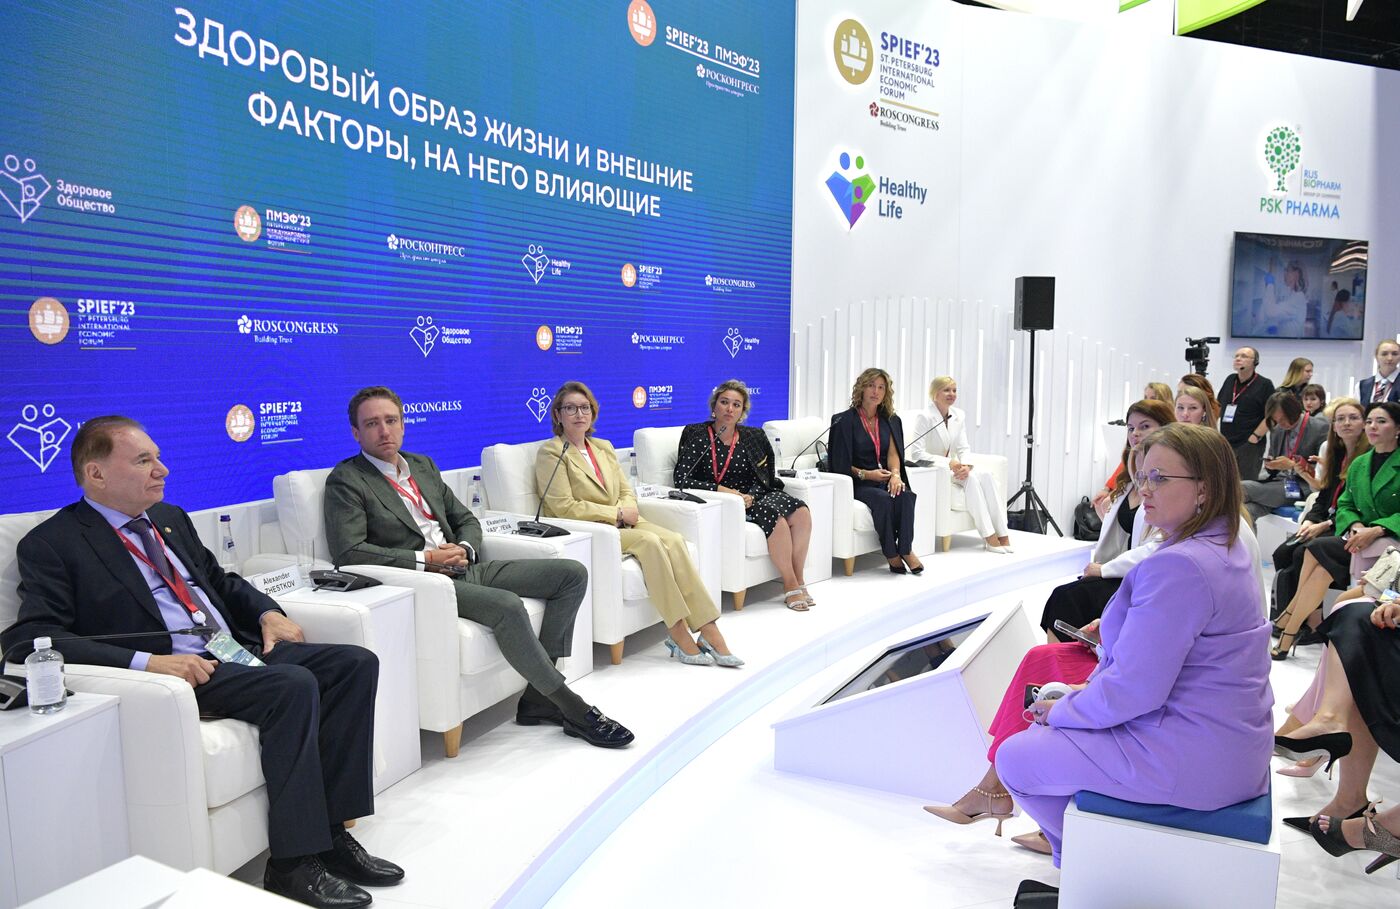 SPIEF-2023. A Healthy Lifestyle and the External Factors Affecting It